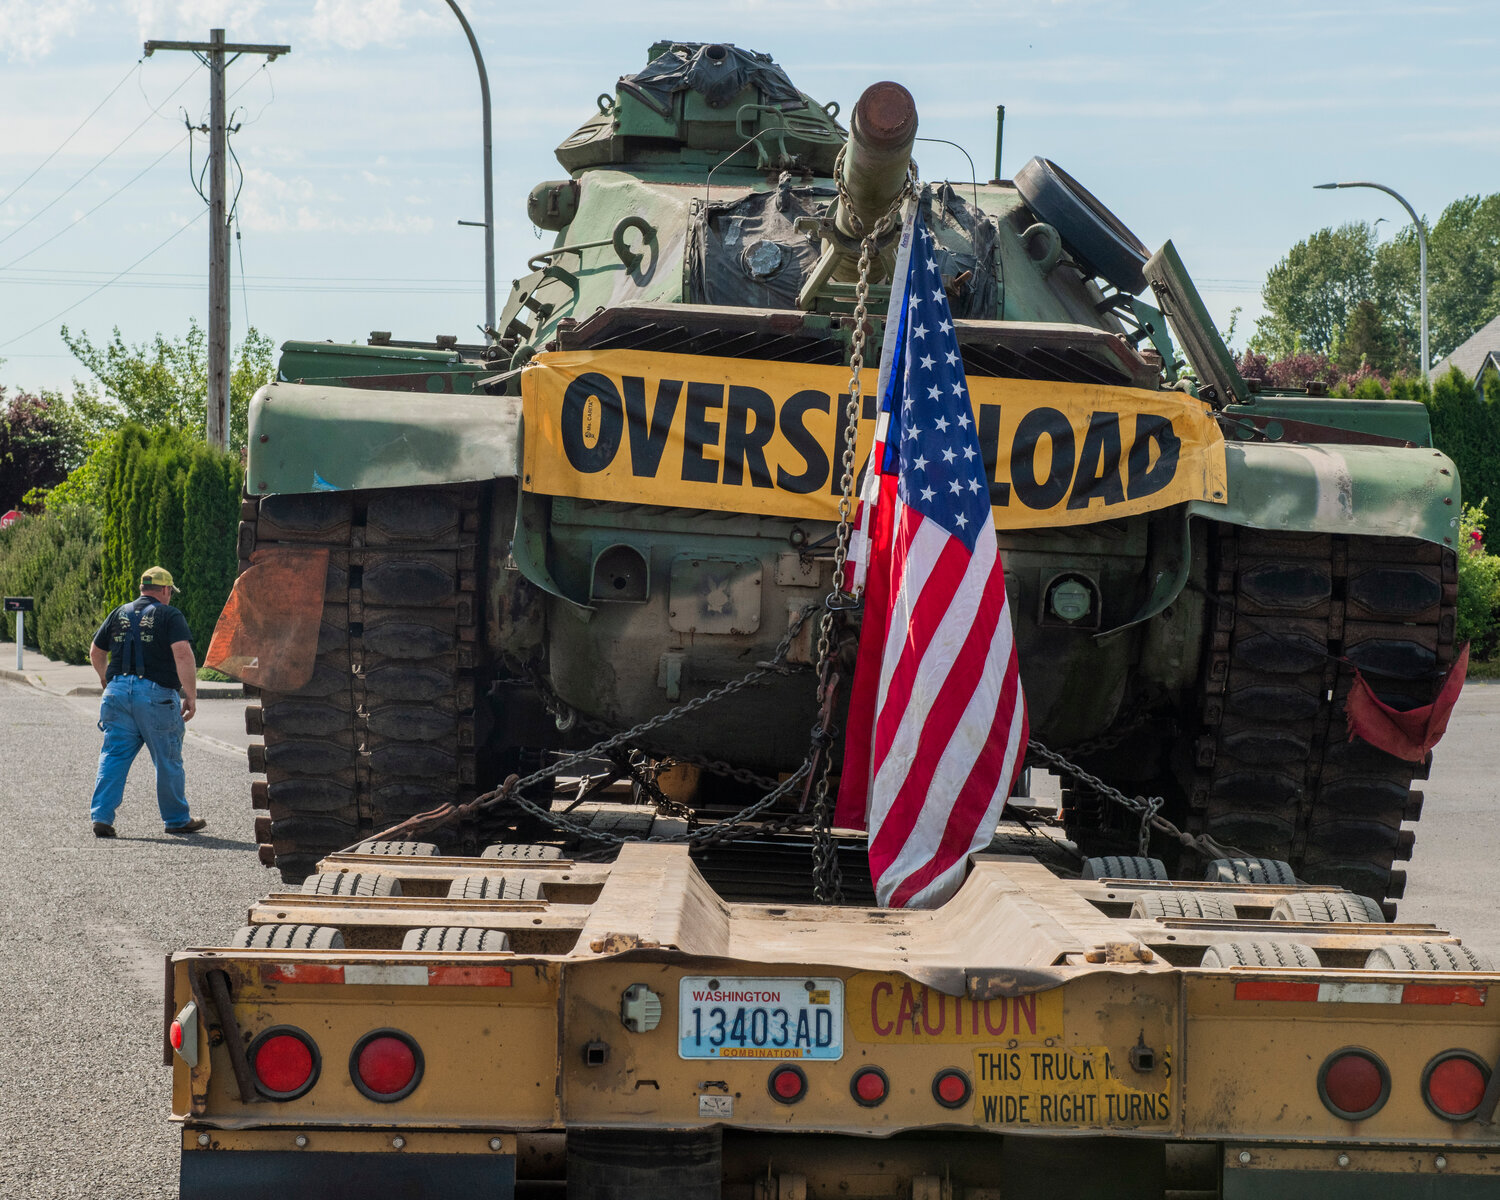 A flag hangs from a M60 tank as it is hauled into the parking lot of the Veterans Memorial Museum in Chehalis on Saturday, May 20.